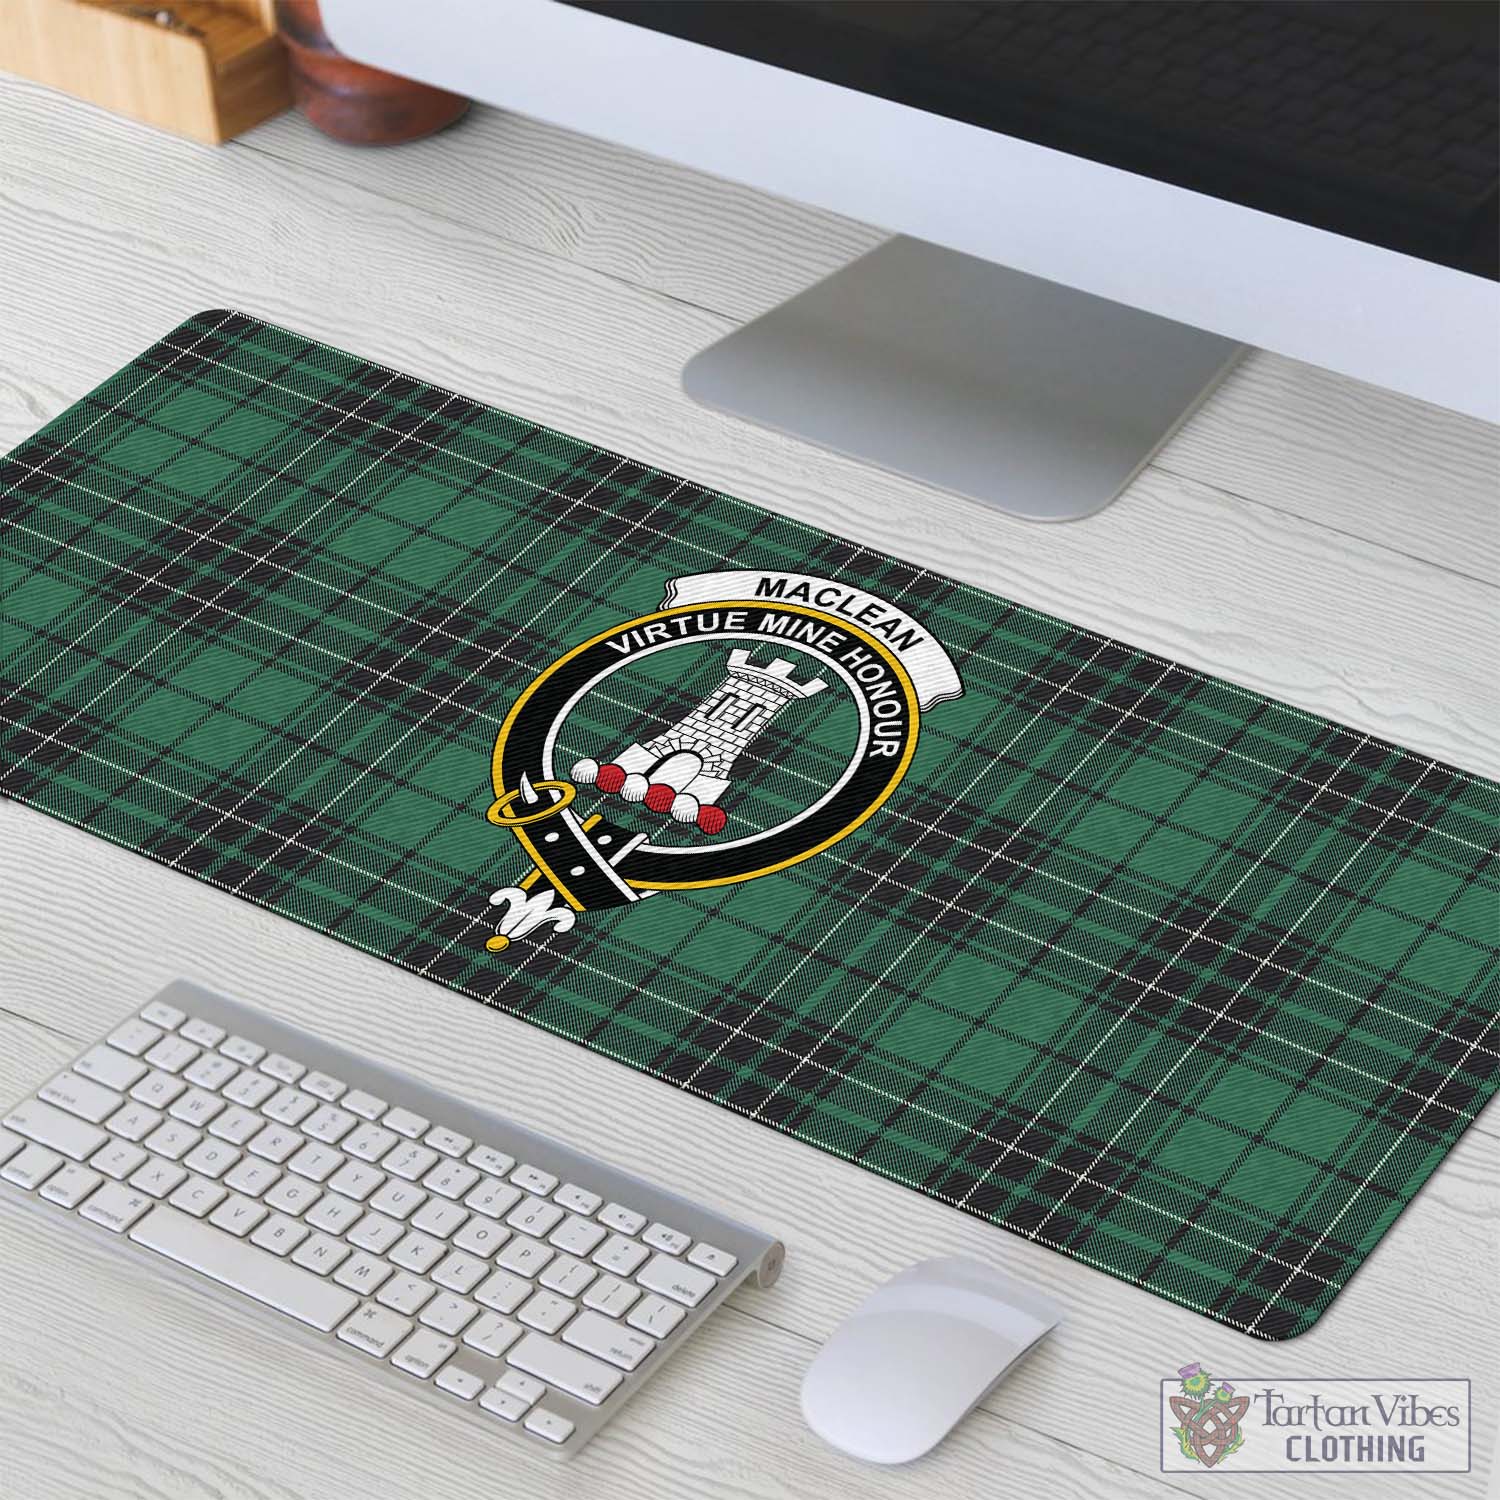 Tartan Vibes Clothing MacLean Hunting Ancient Tartan Mouse Pad with Family Crest